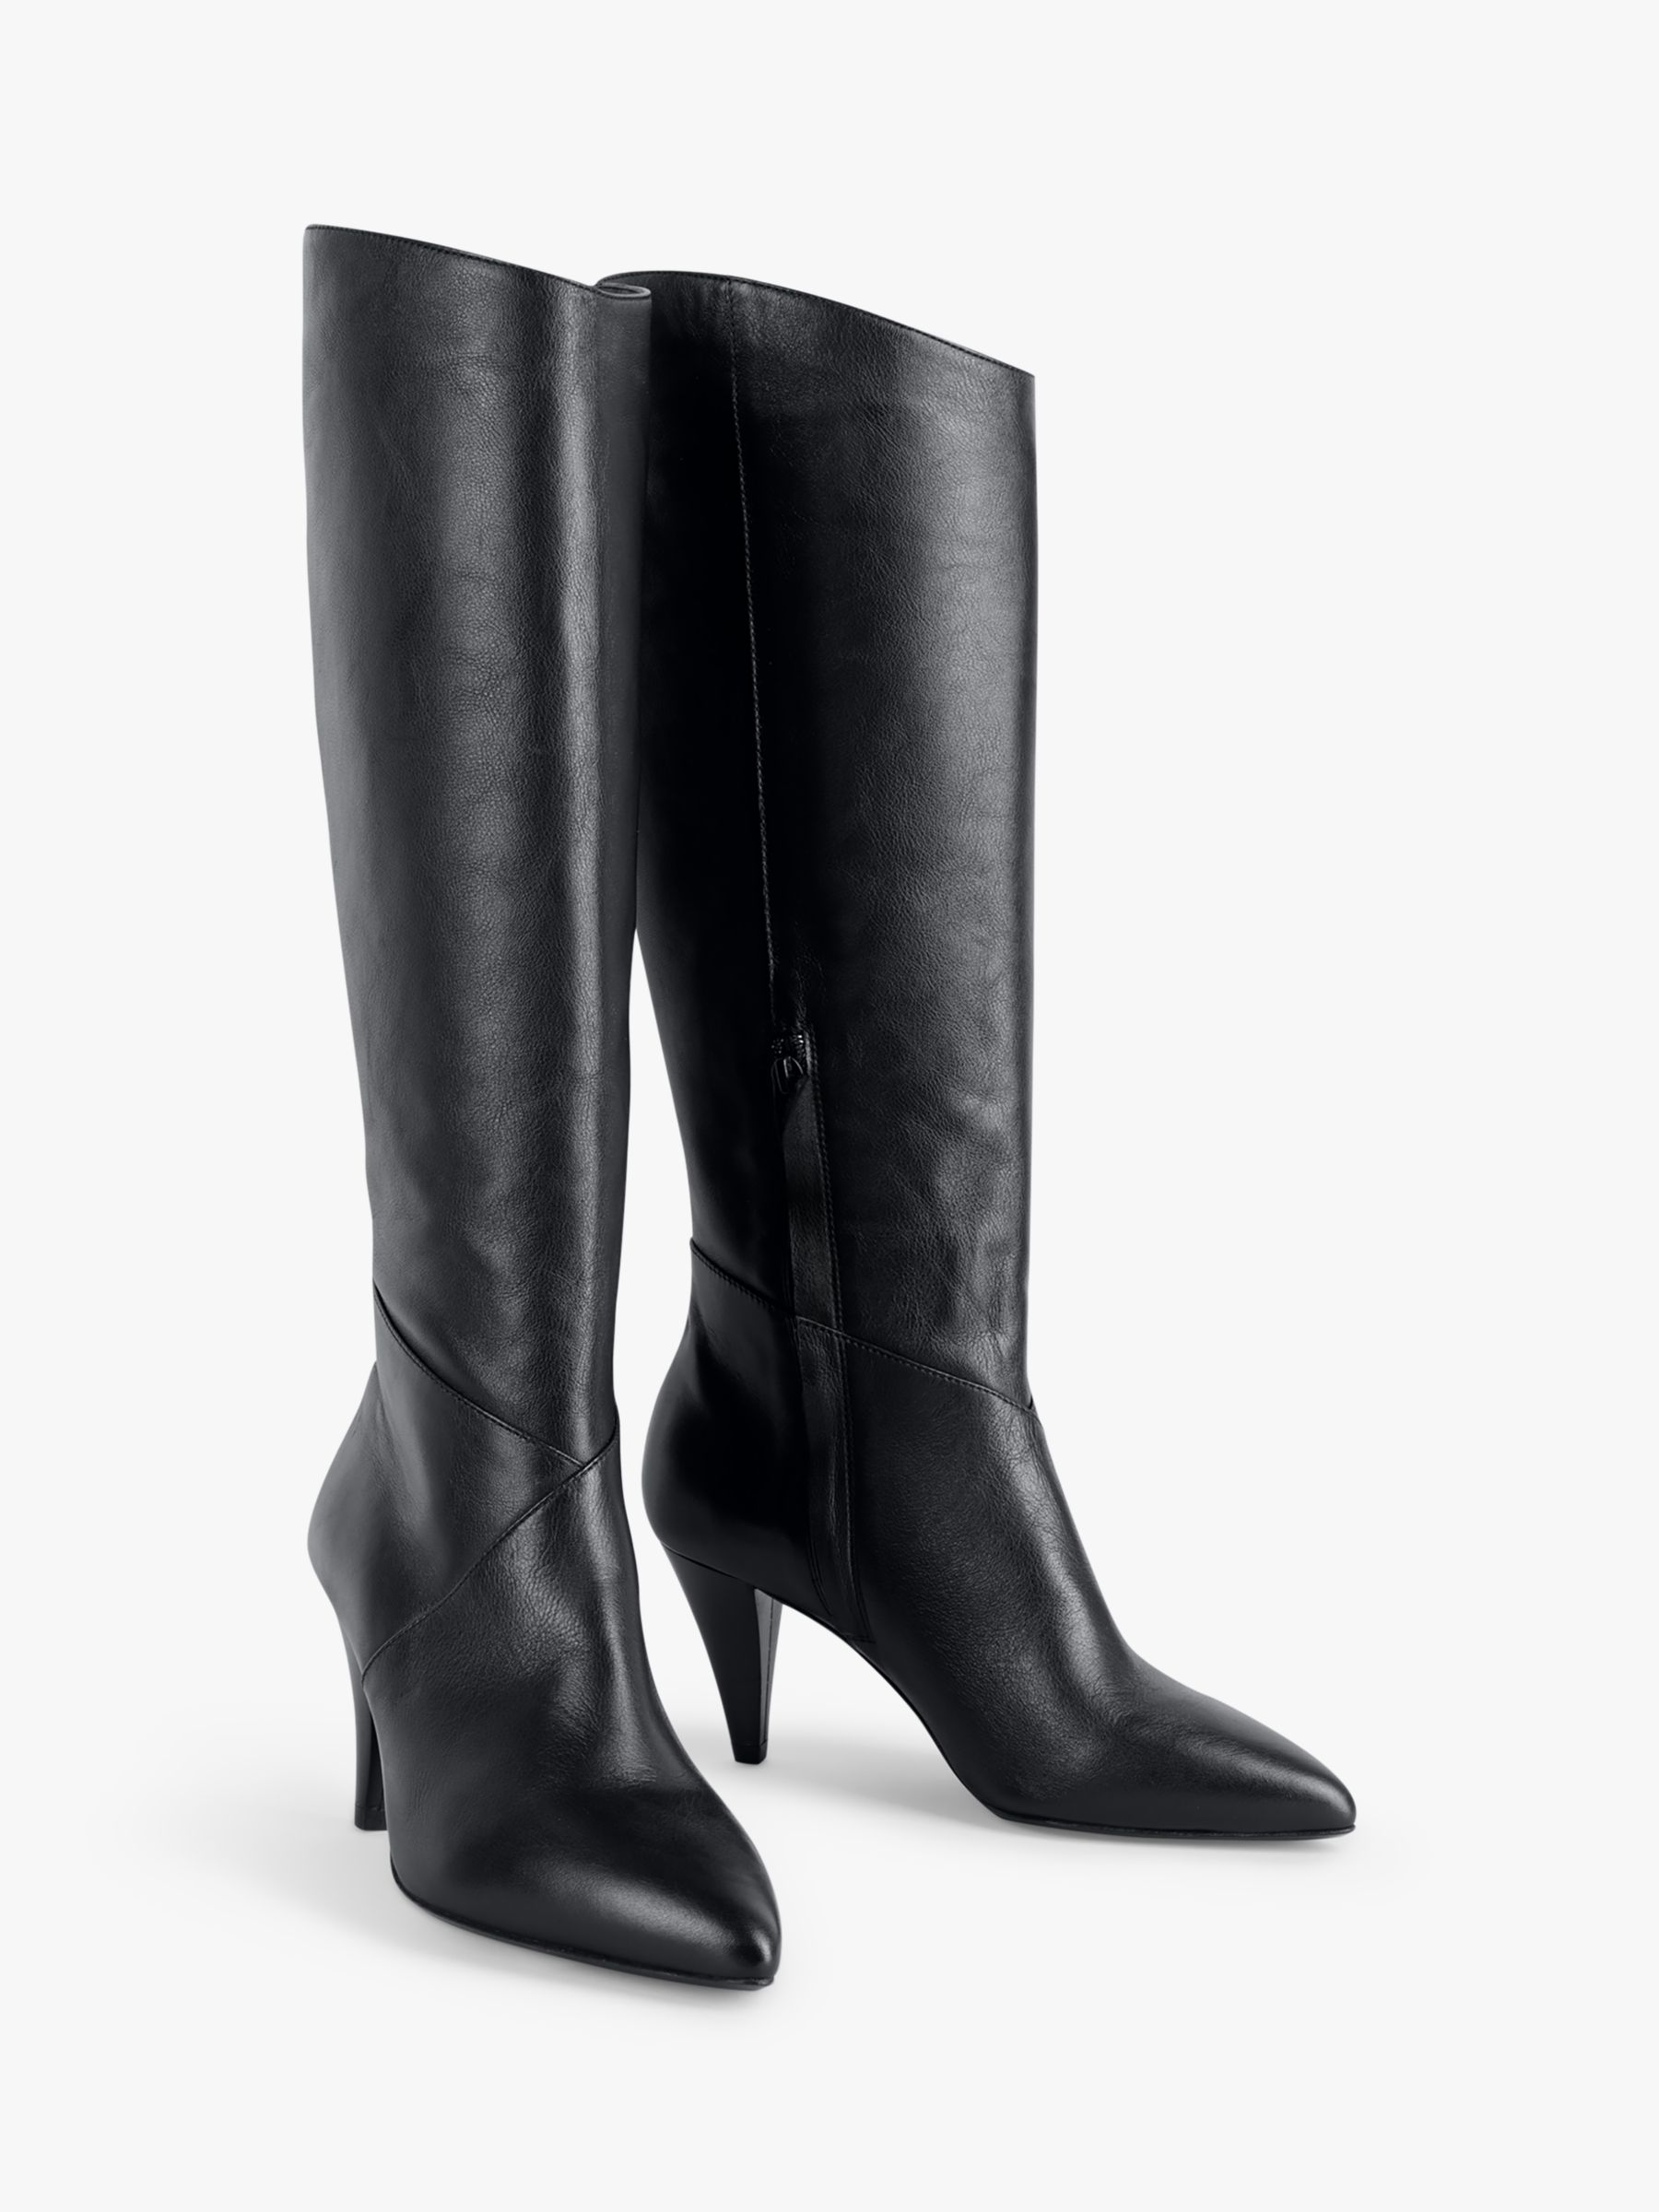 hush Milford Leather Knee High Boots, Black